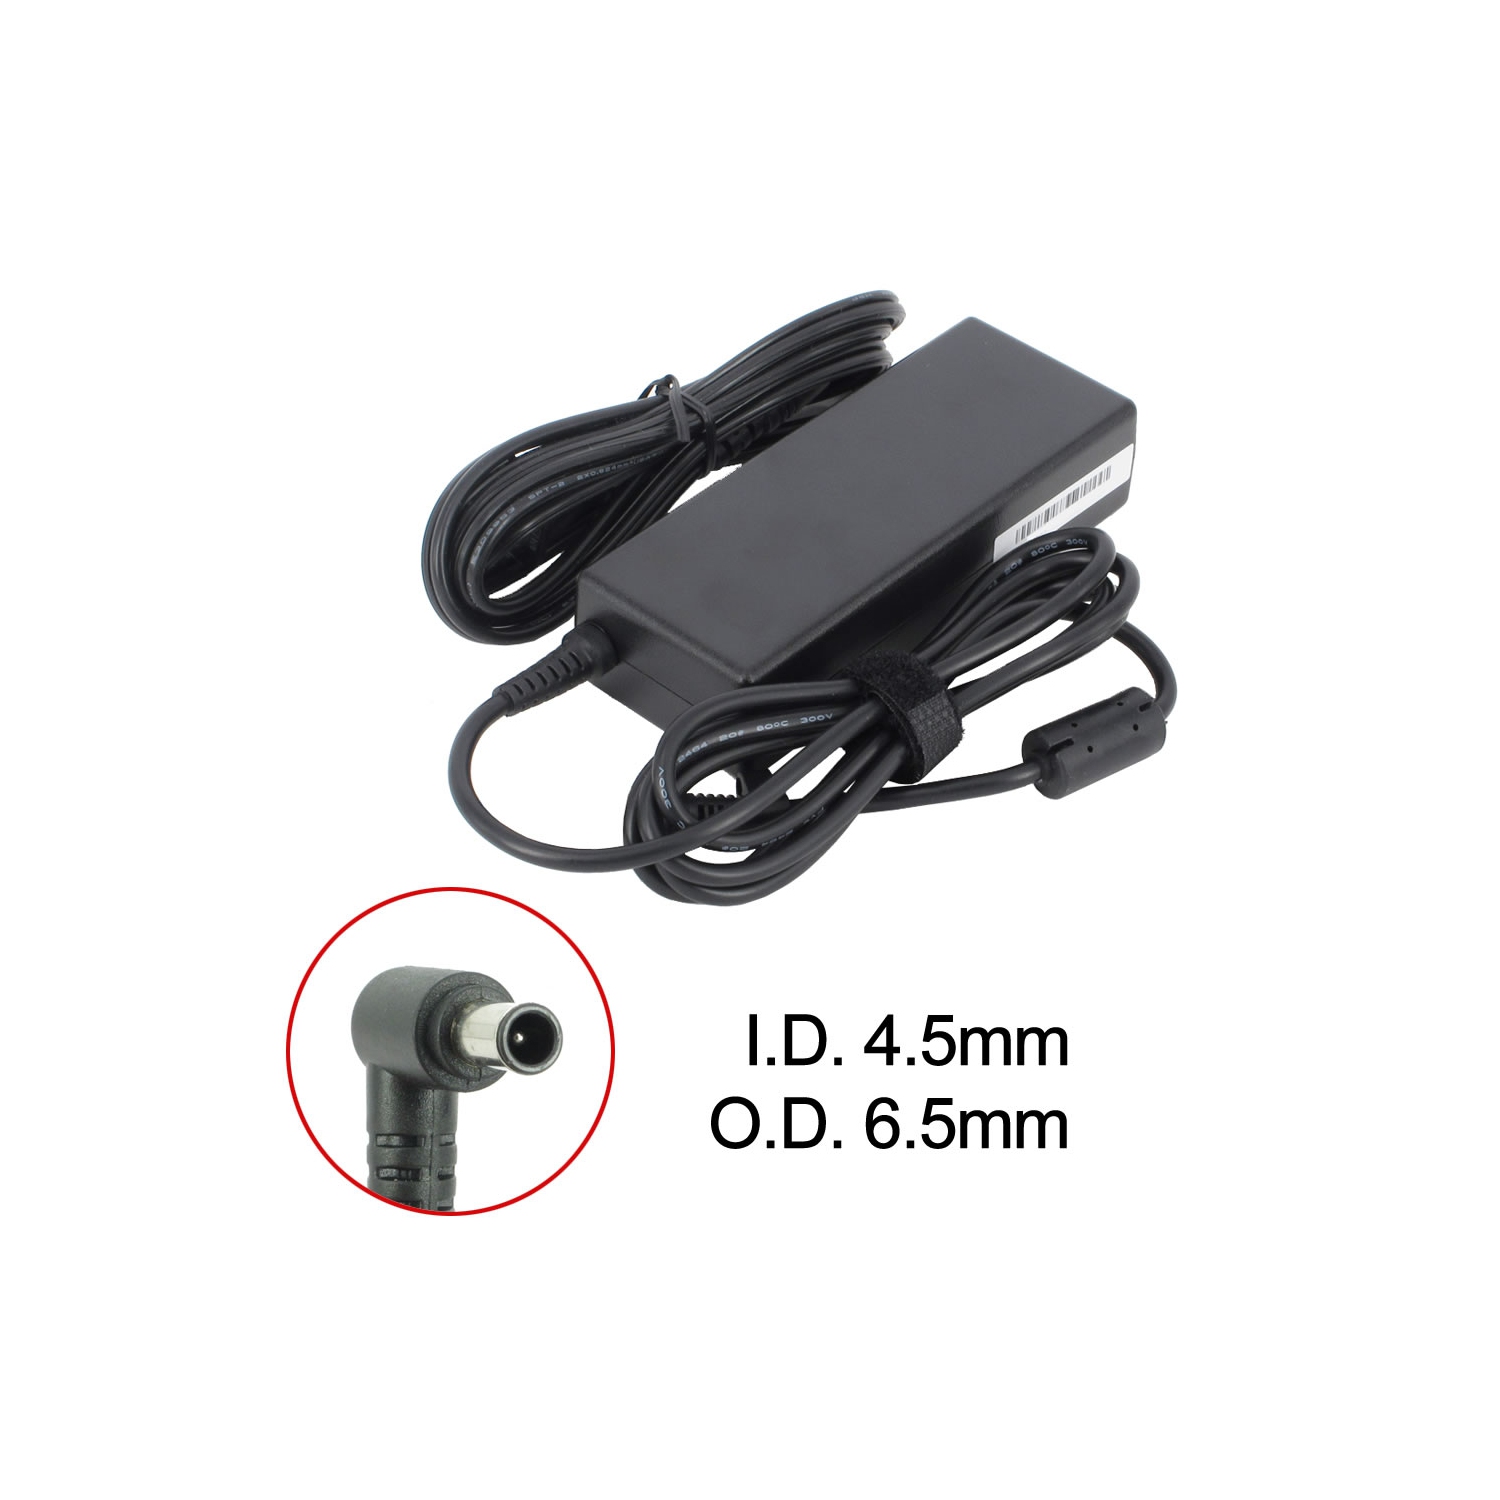 Brand New Laptop AC Adapter for Sony VGN-P610/Q, PCGA-AC19V13, VGP-AC19V12, VGP-AC19V23, VGP-AC19V37, VGP-AC19V76